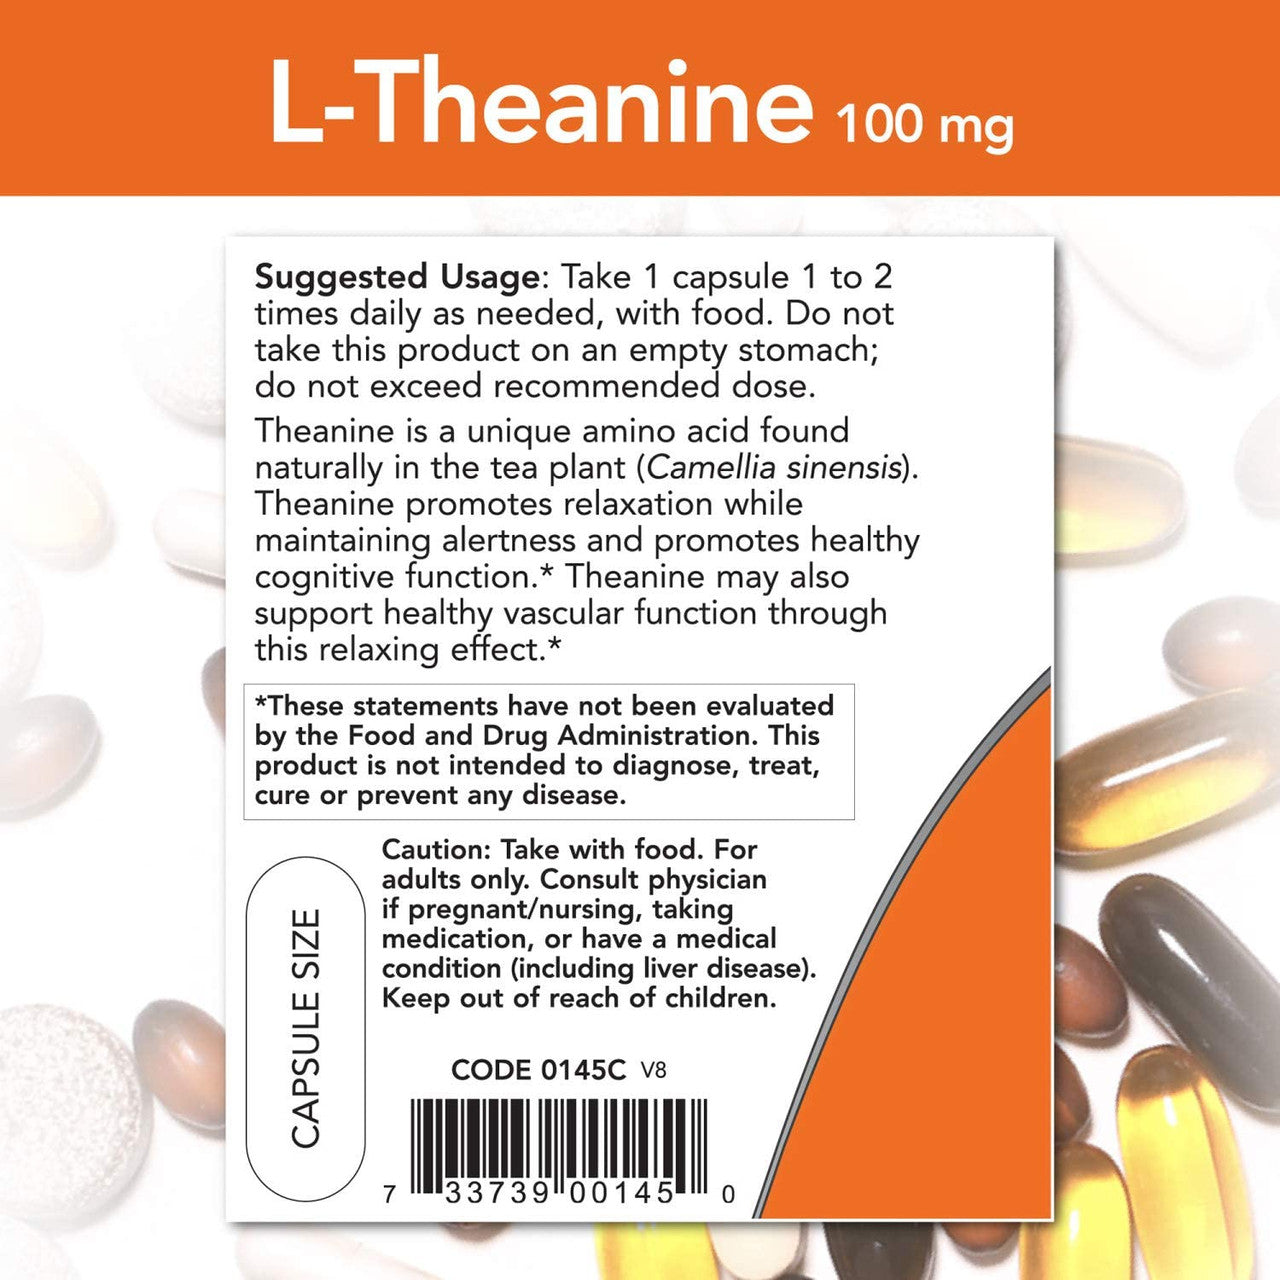 Now L-Theanine 100mg directions